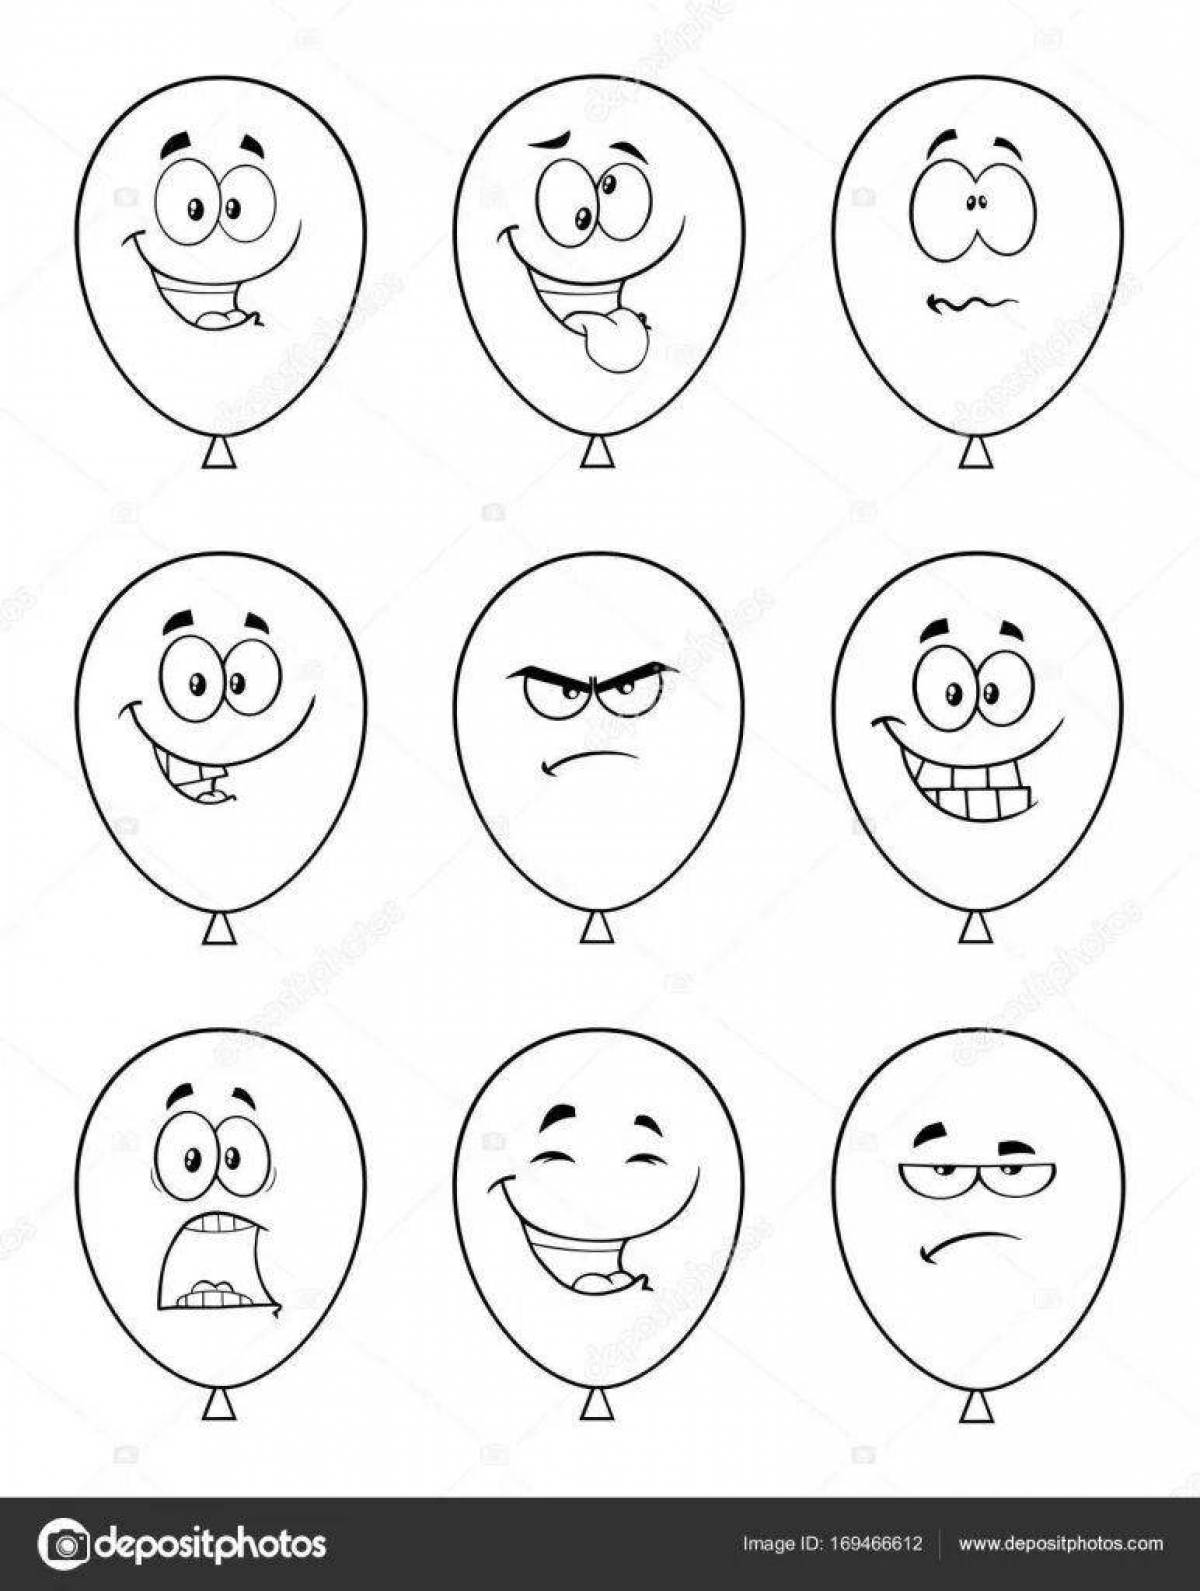 Encouraging coloring of emotions and feelings for children